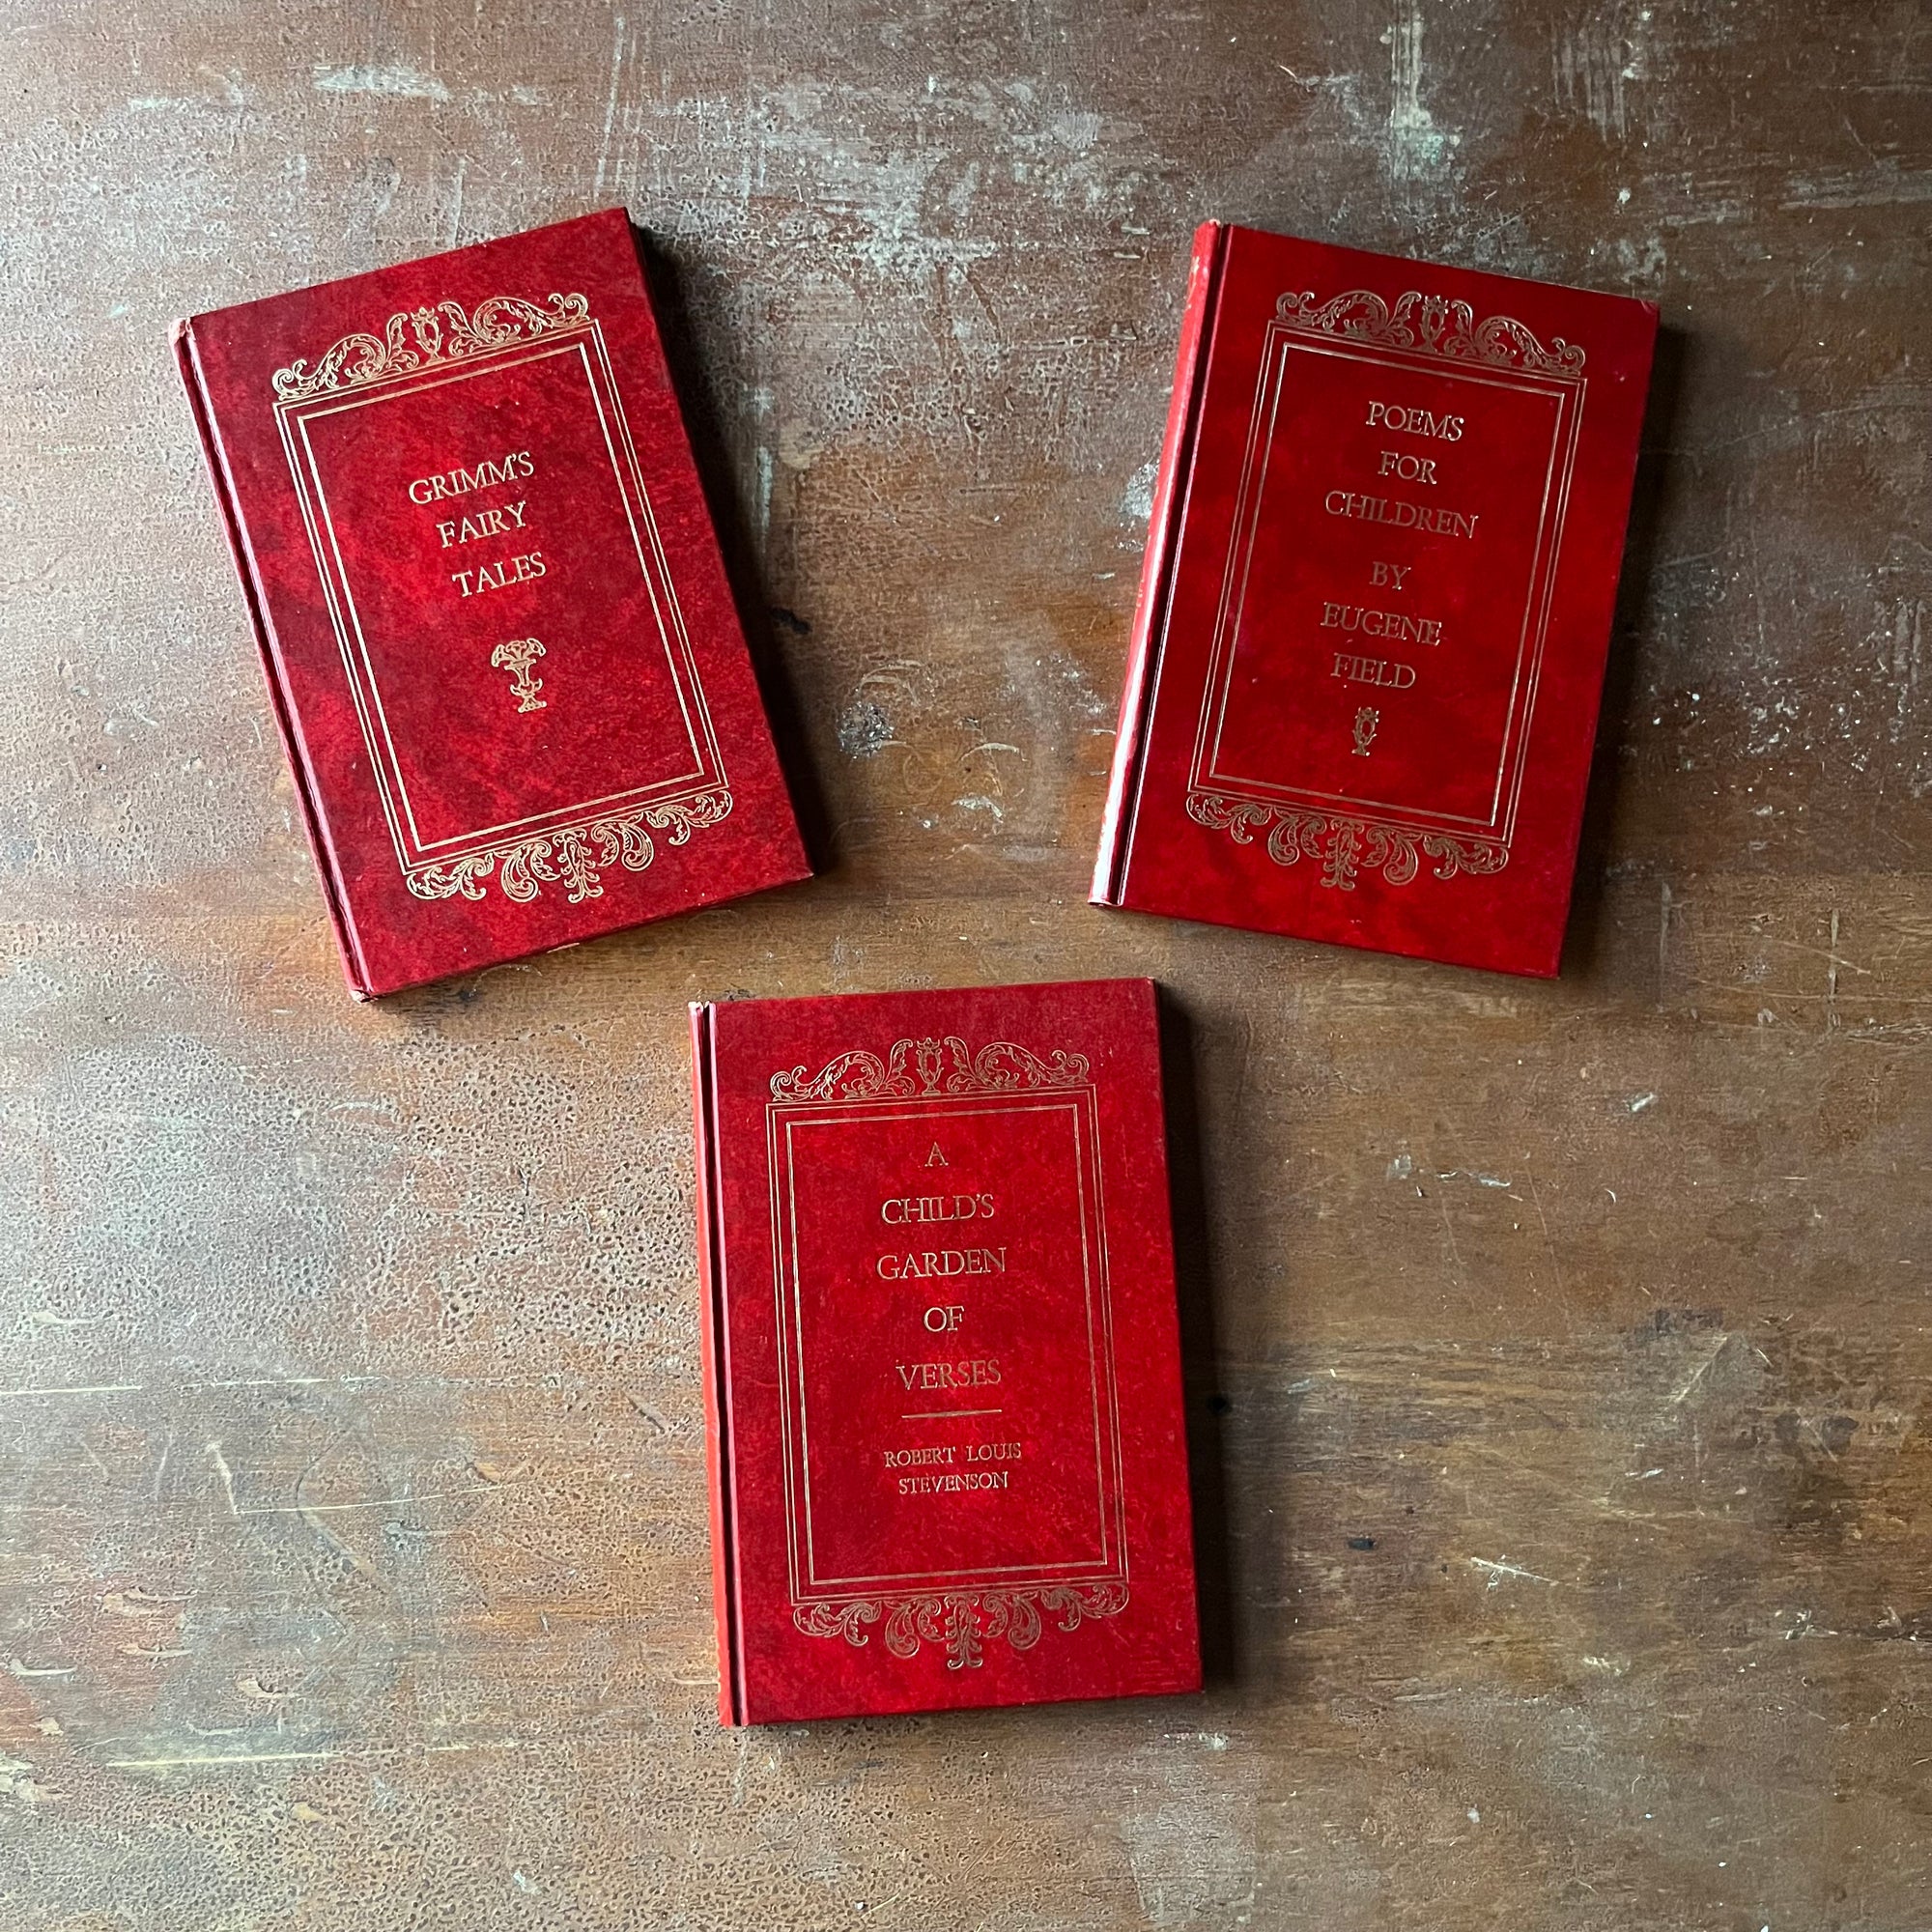 Collection of Avenel Books Editions-A Child's Garden of Verses, Poems for Children by Eugene Fields, and Grimm's Fairy Tales-vintage children's books-view of the embossed front covers in red & gold